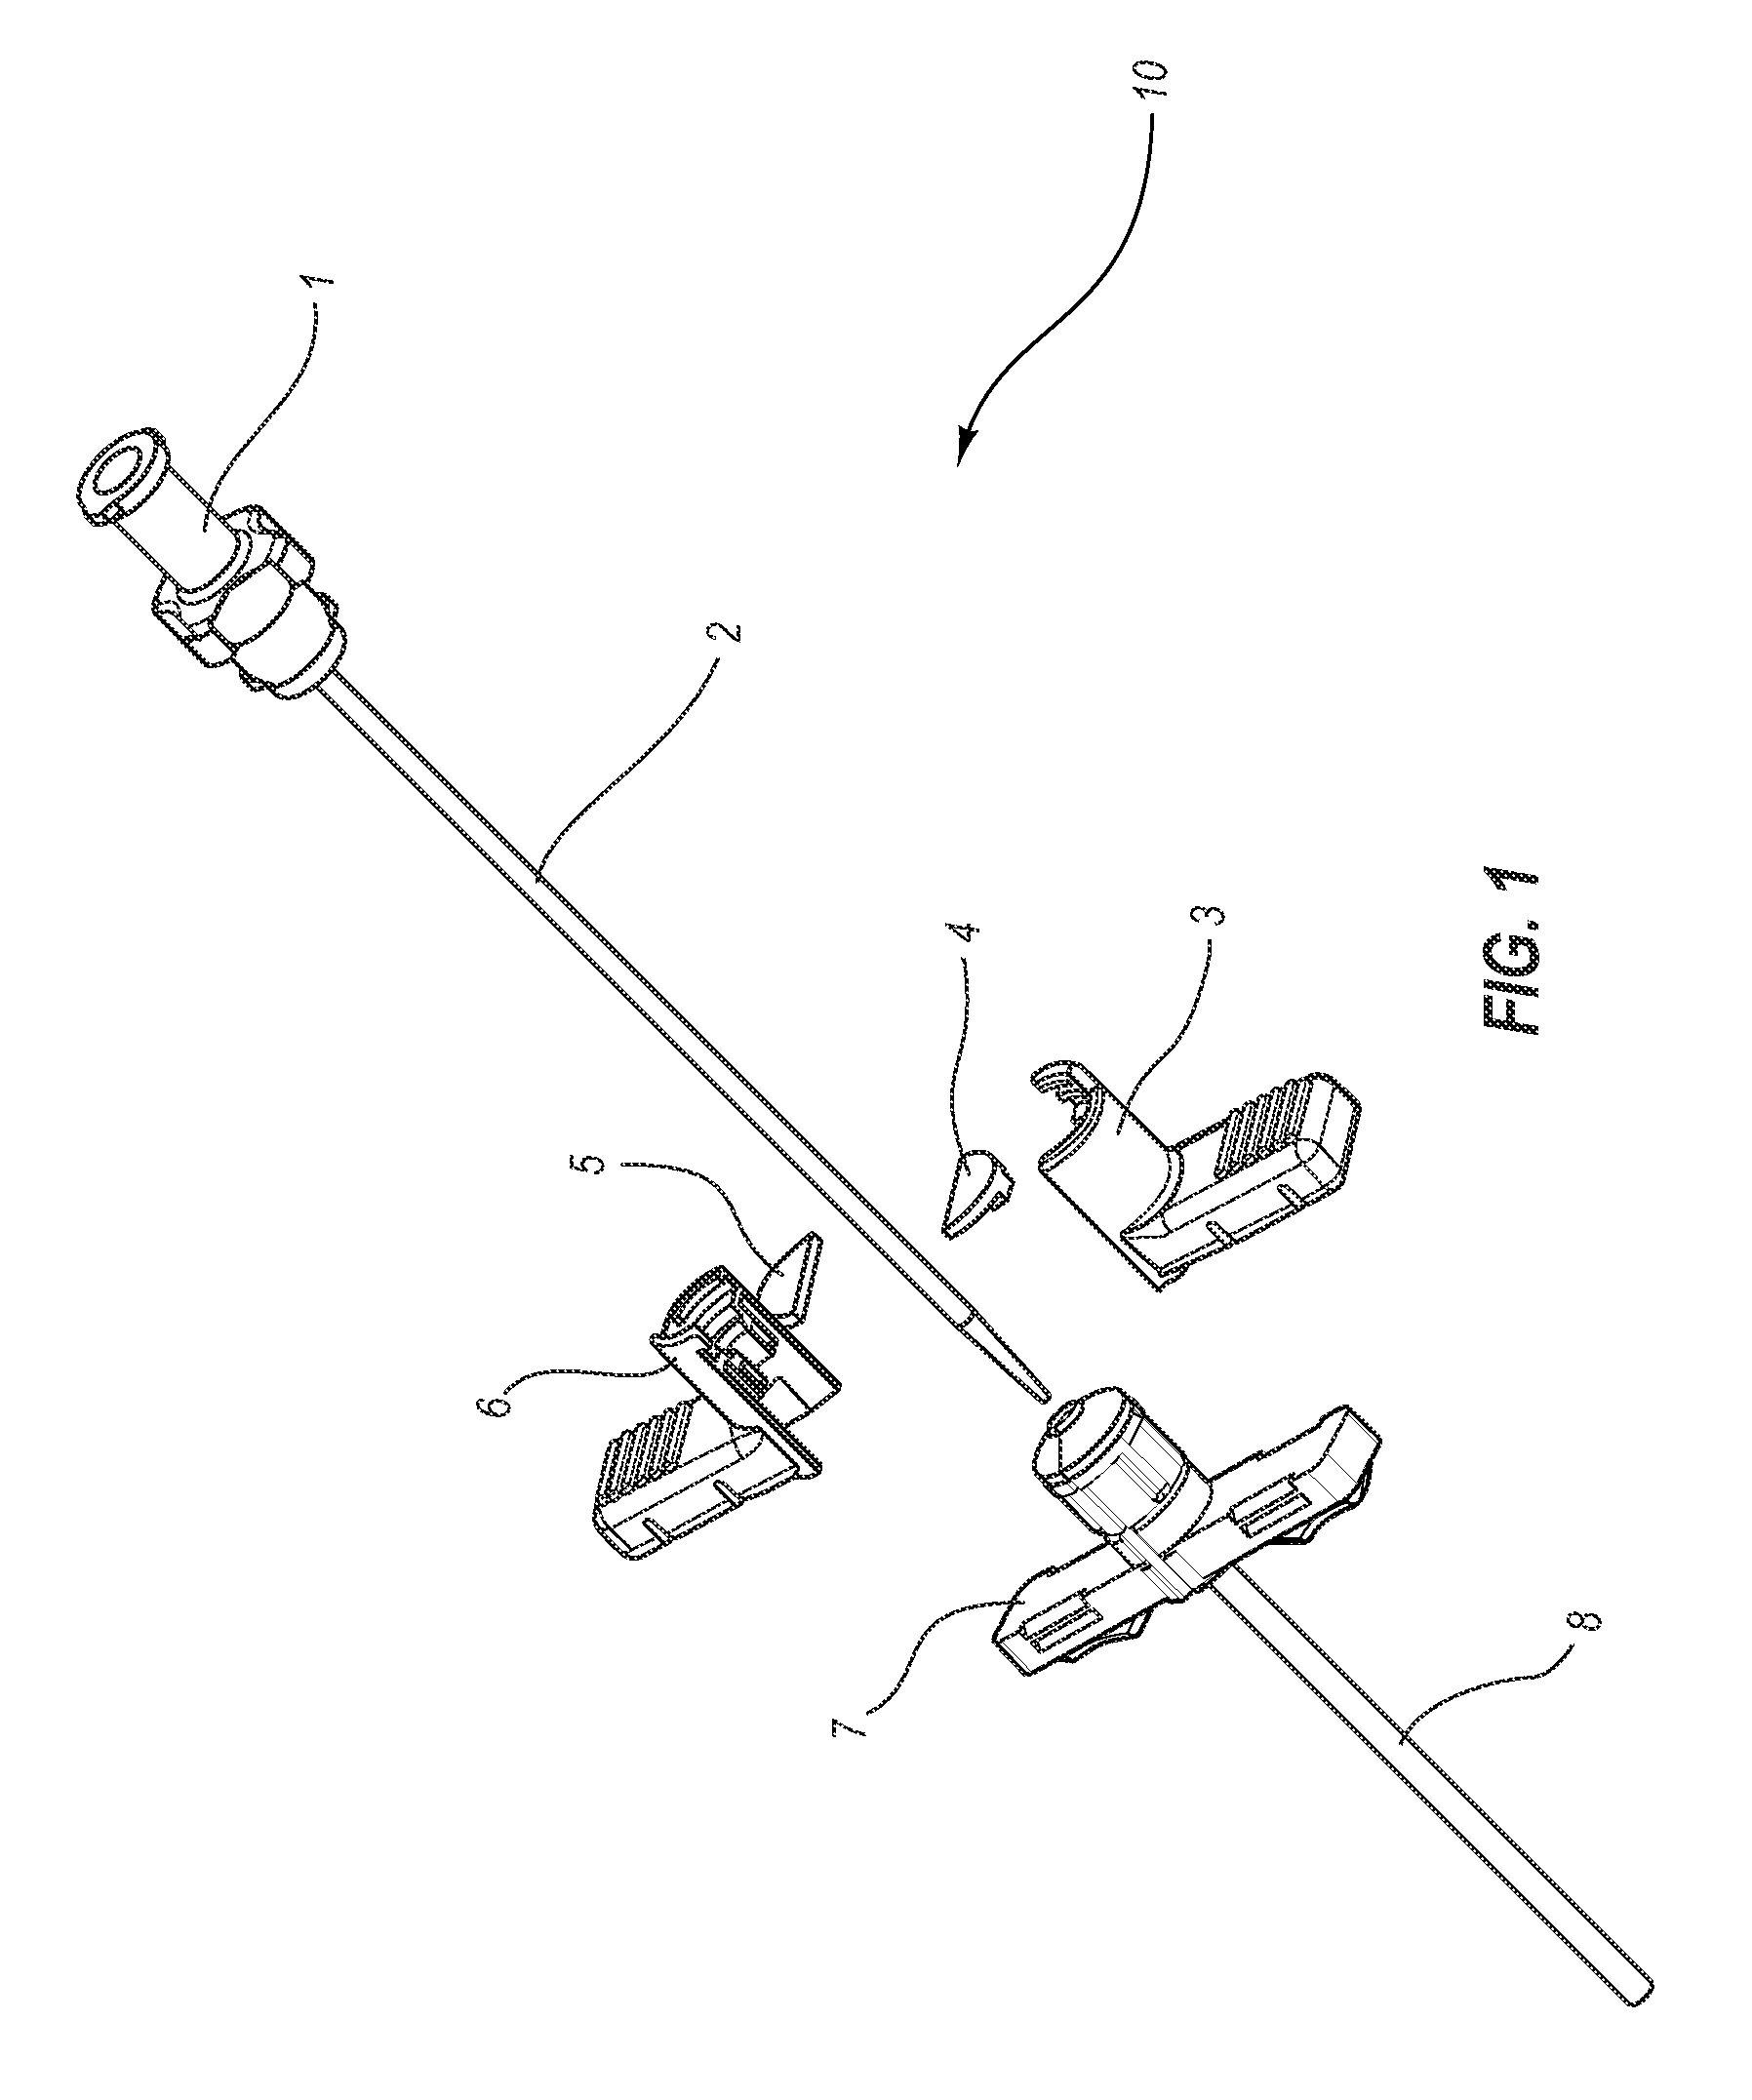 Catheter introducer including a valve and valve actuator